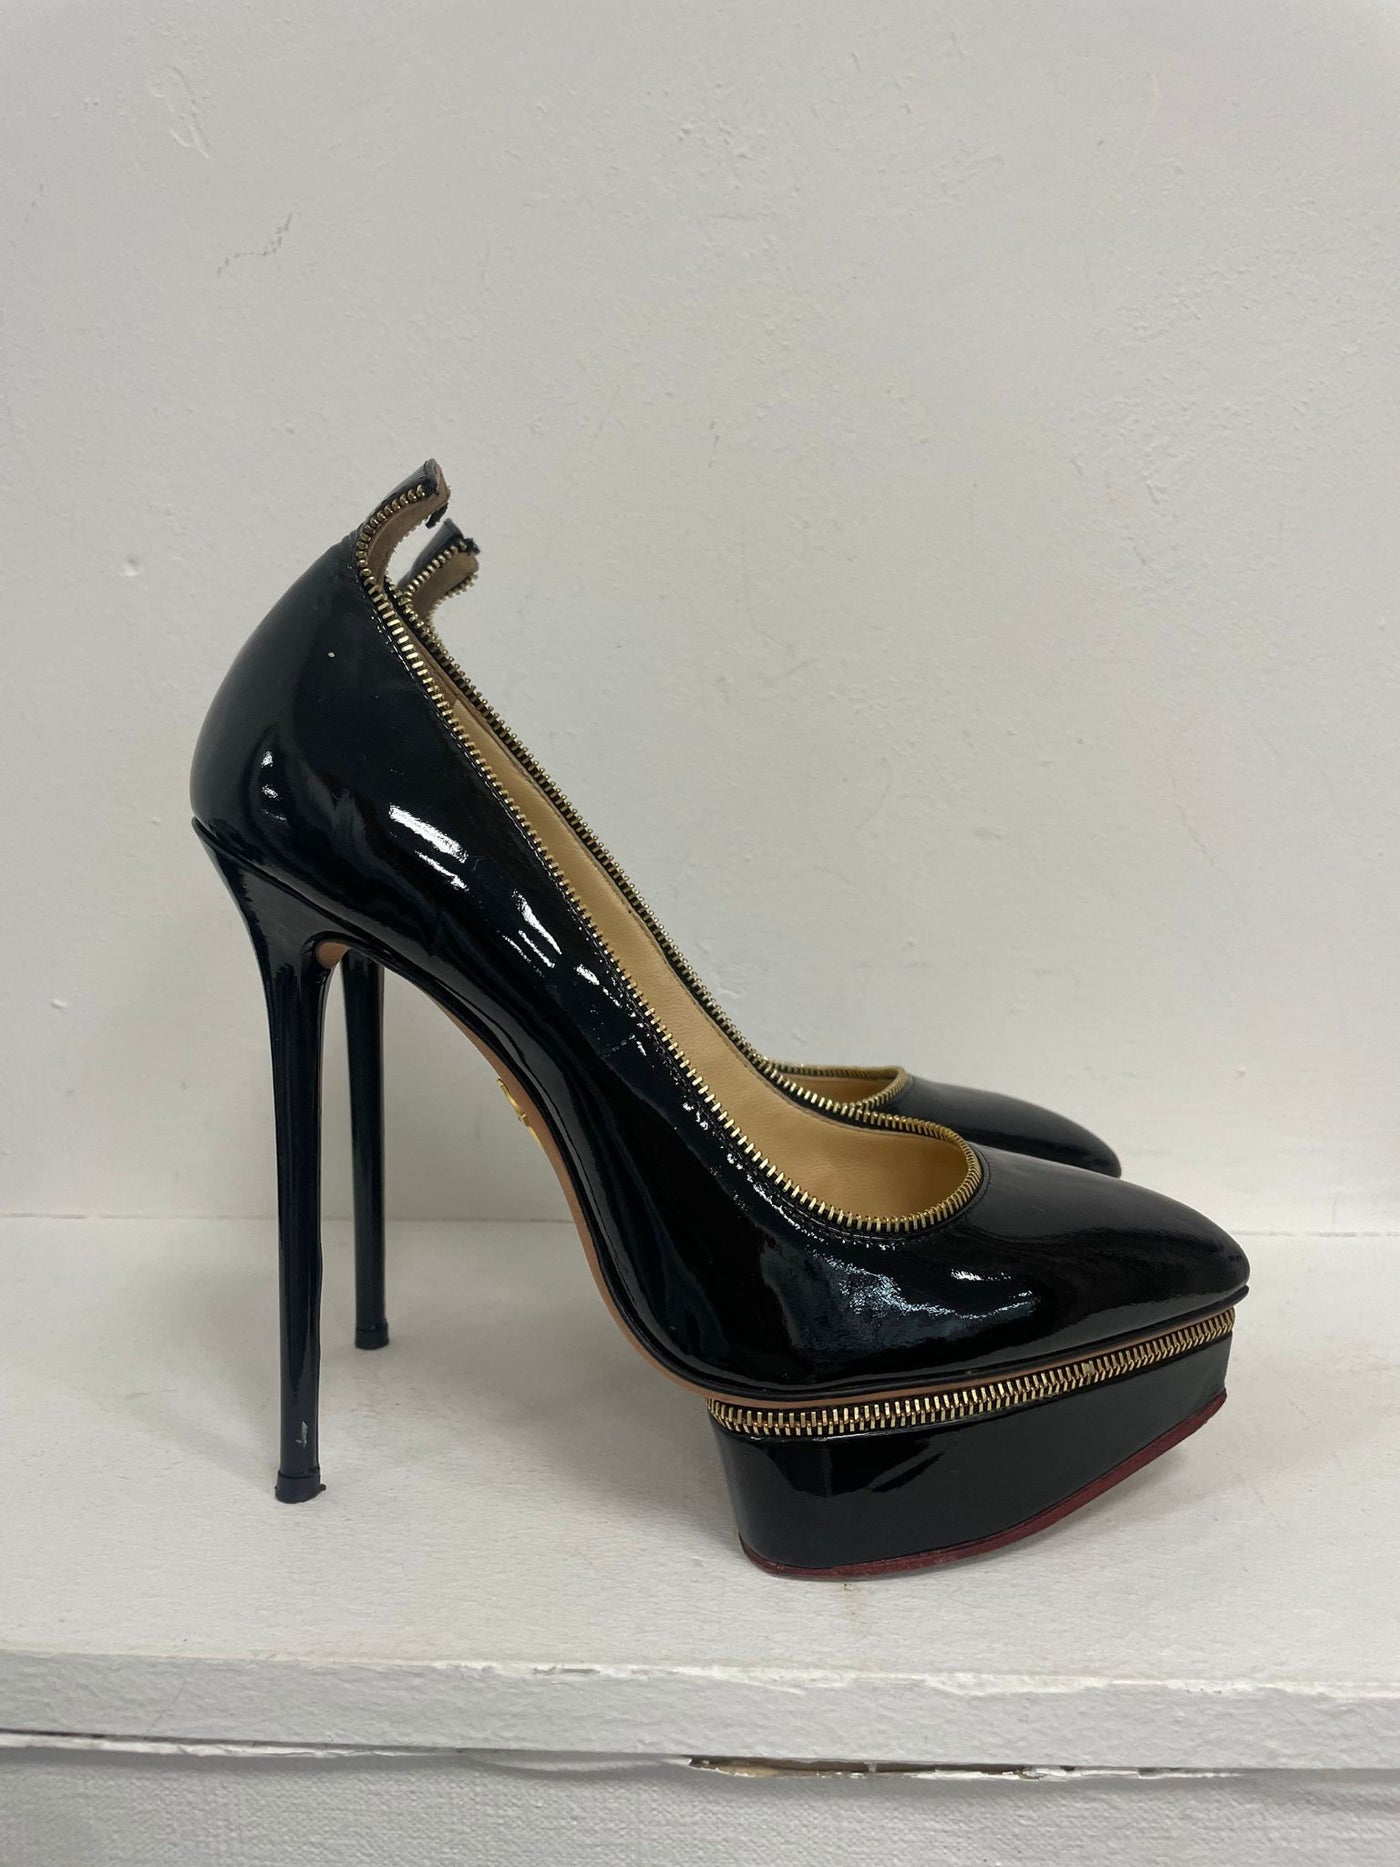 Charlotte Olympia x Agent  provocateur patent leather heels size 38